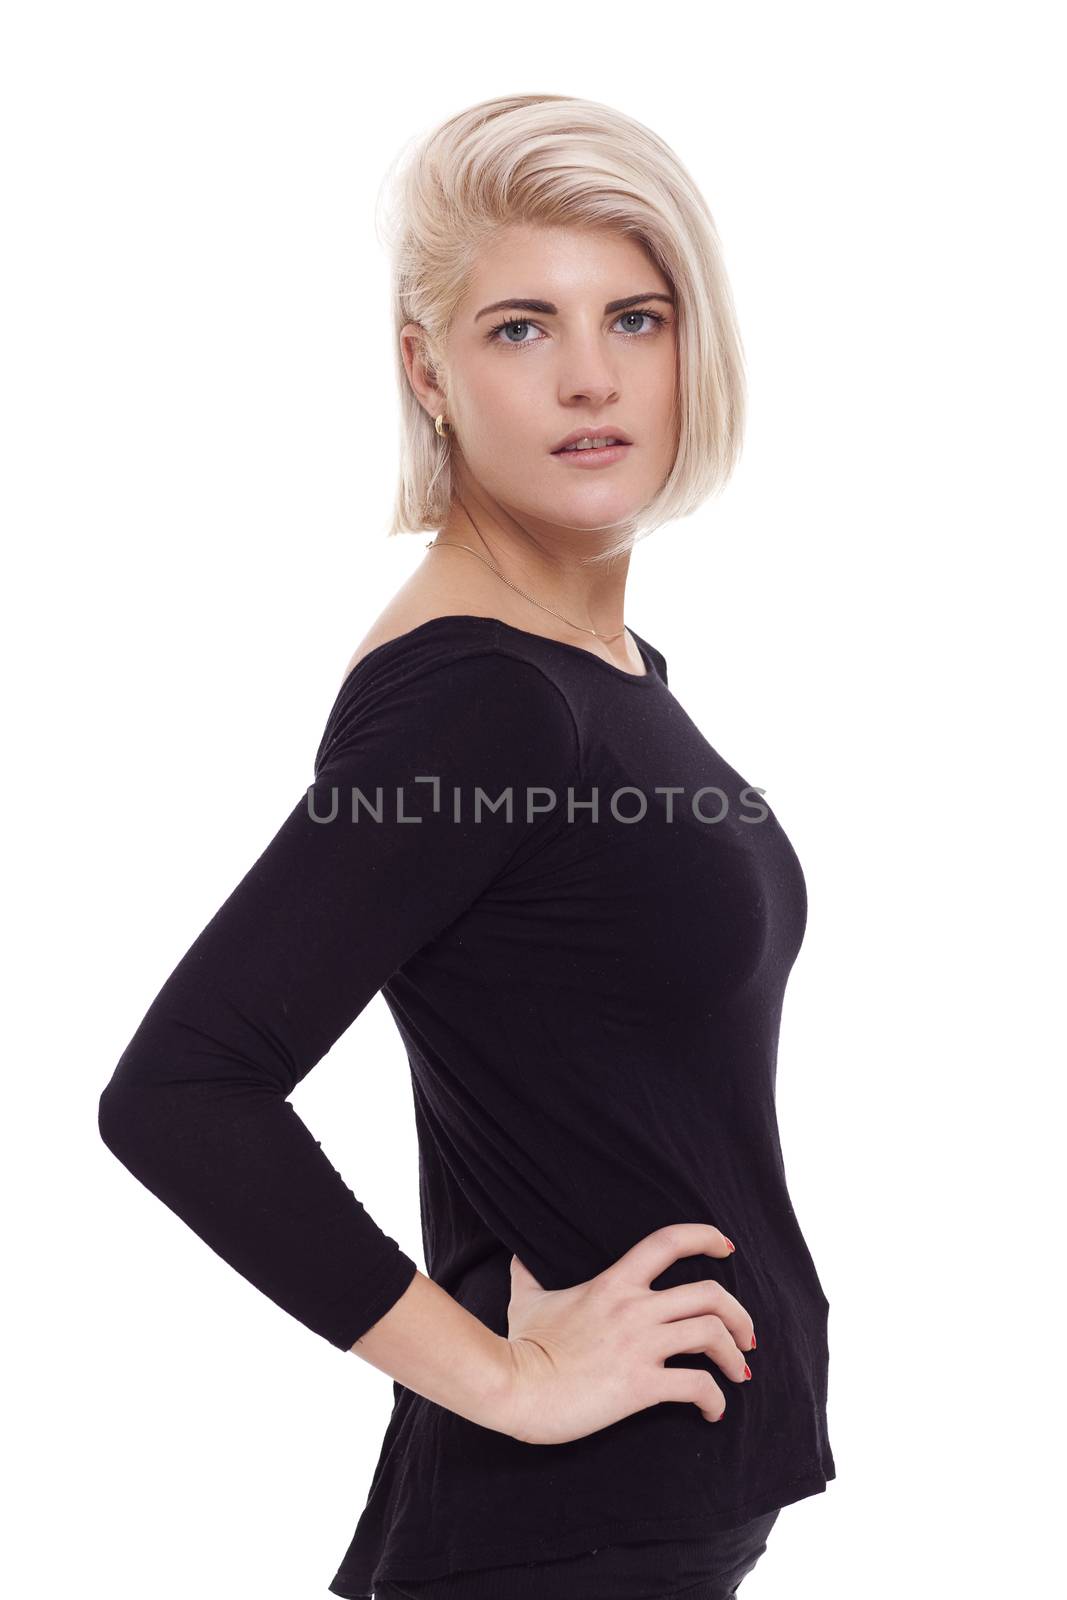 Close up Portrait of Pretty Blond Woman Posing in Trendy Black Shirt While Looking at the Camera. Isolated on White Background.